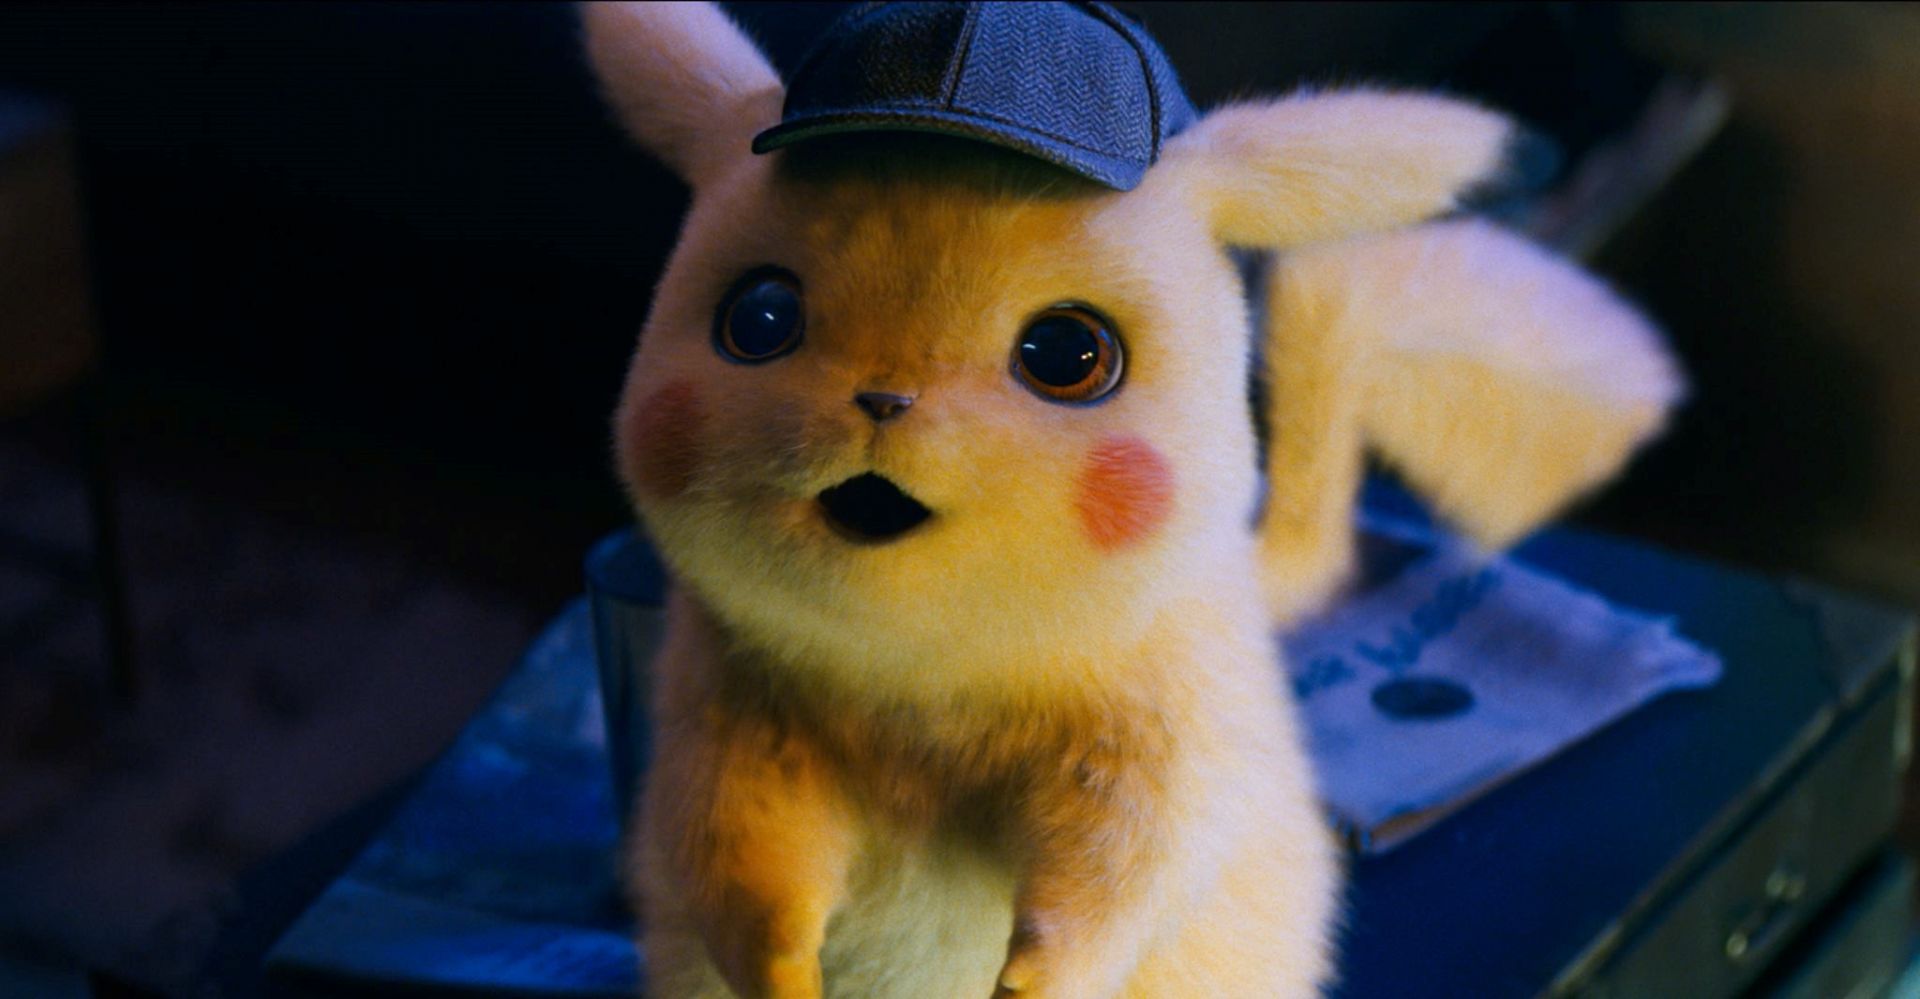 REVIEW: The problem with ‘Pokemon: Detective Pikachu’ isn’t magic - WordSlingers